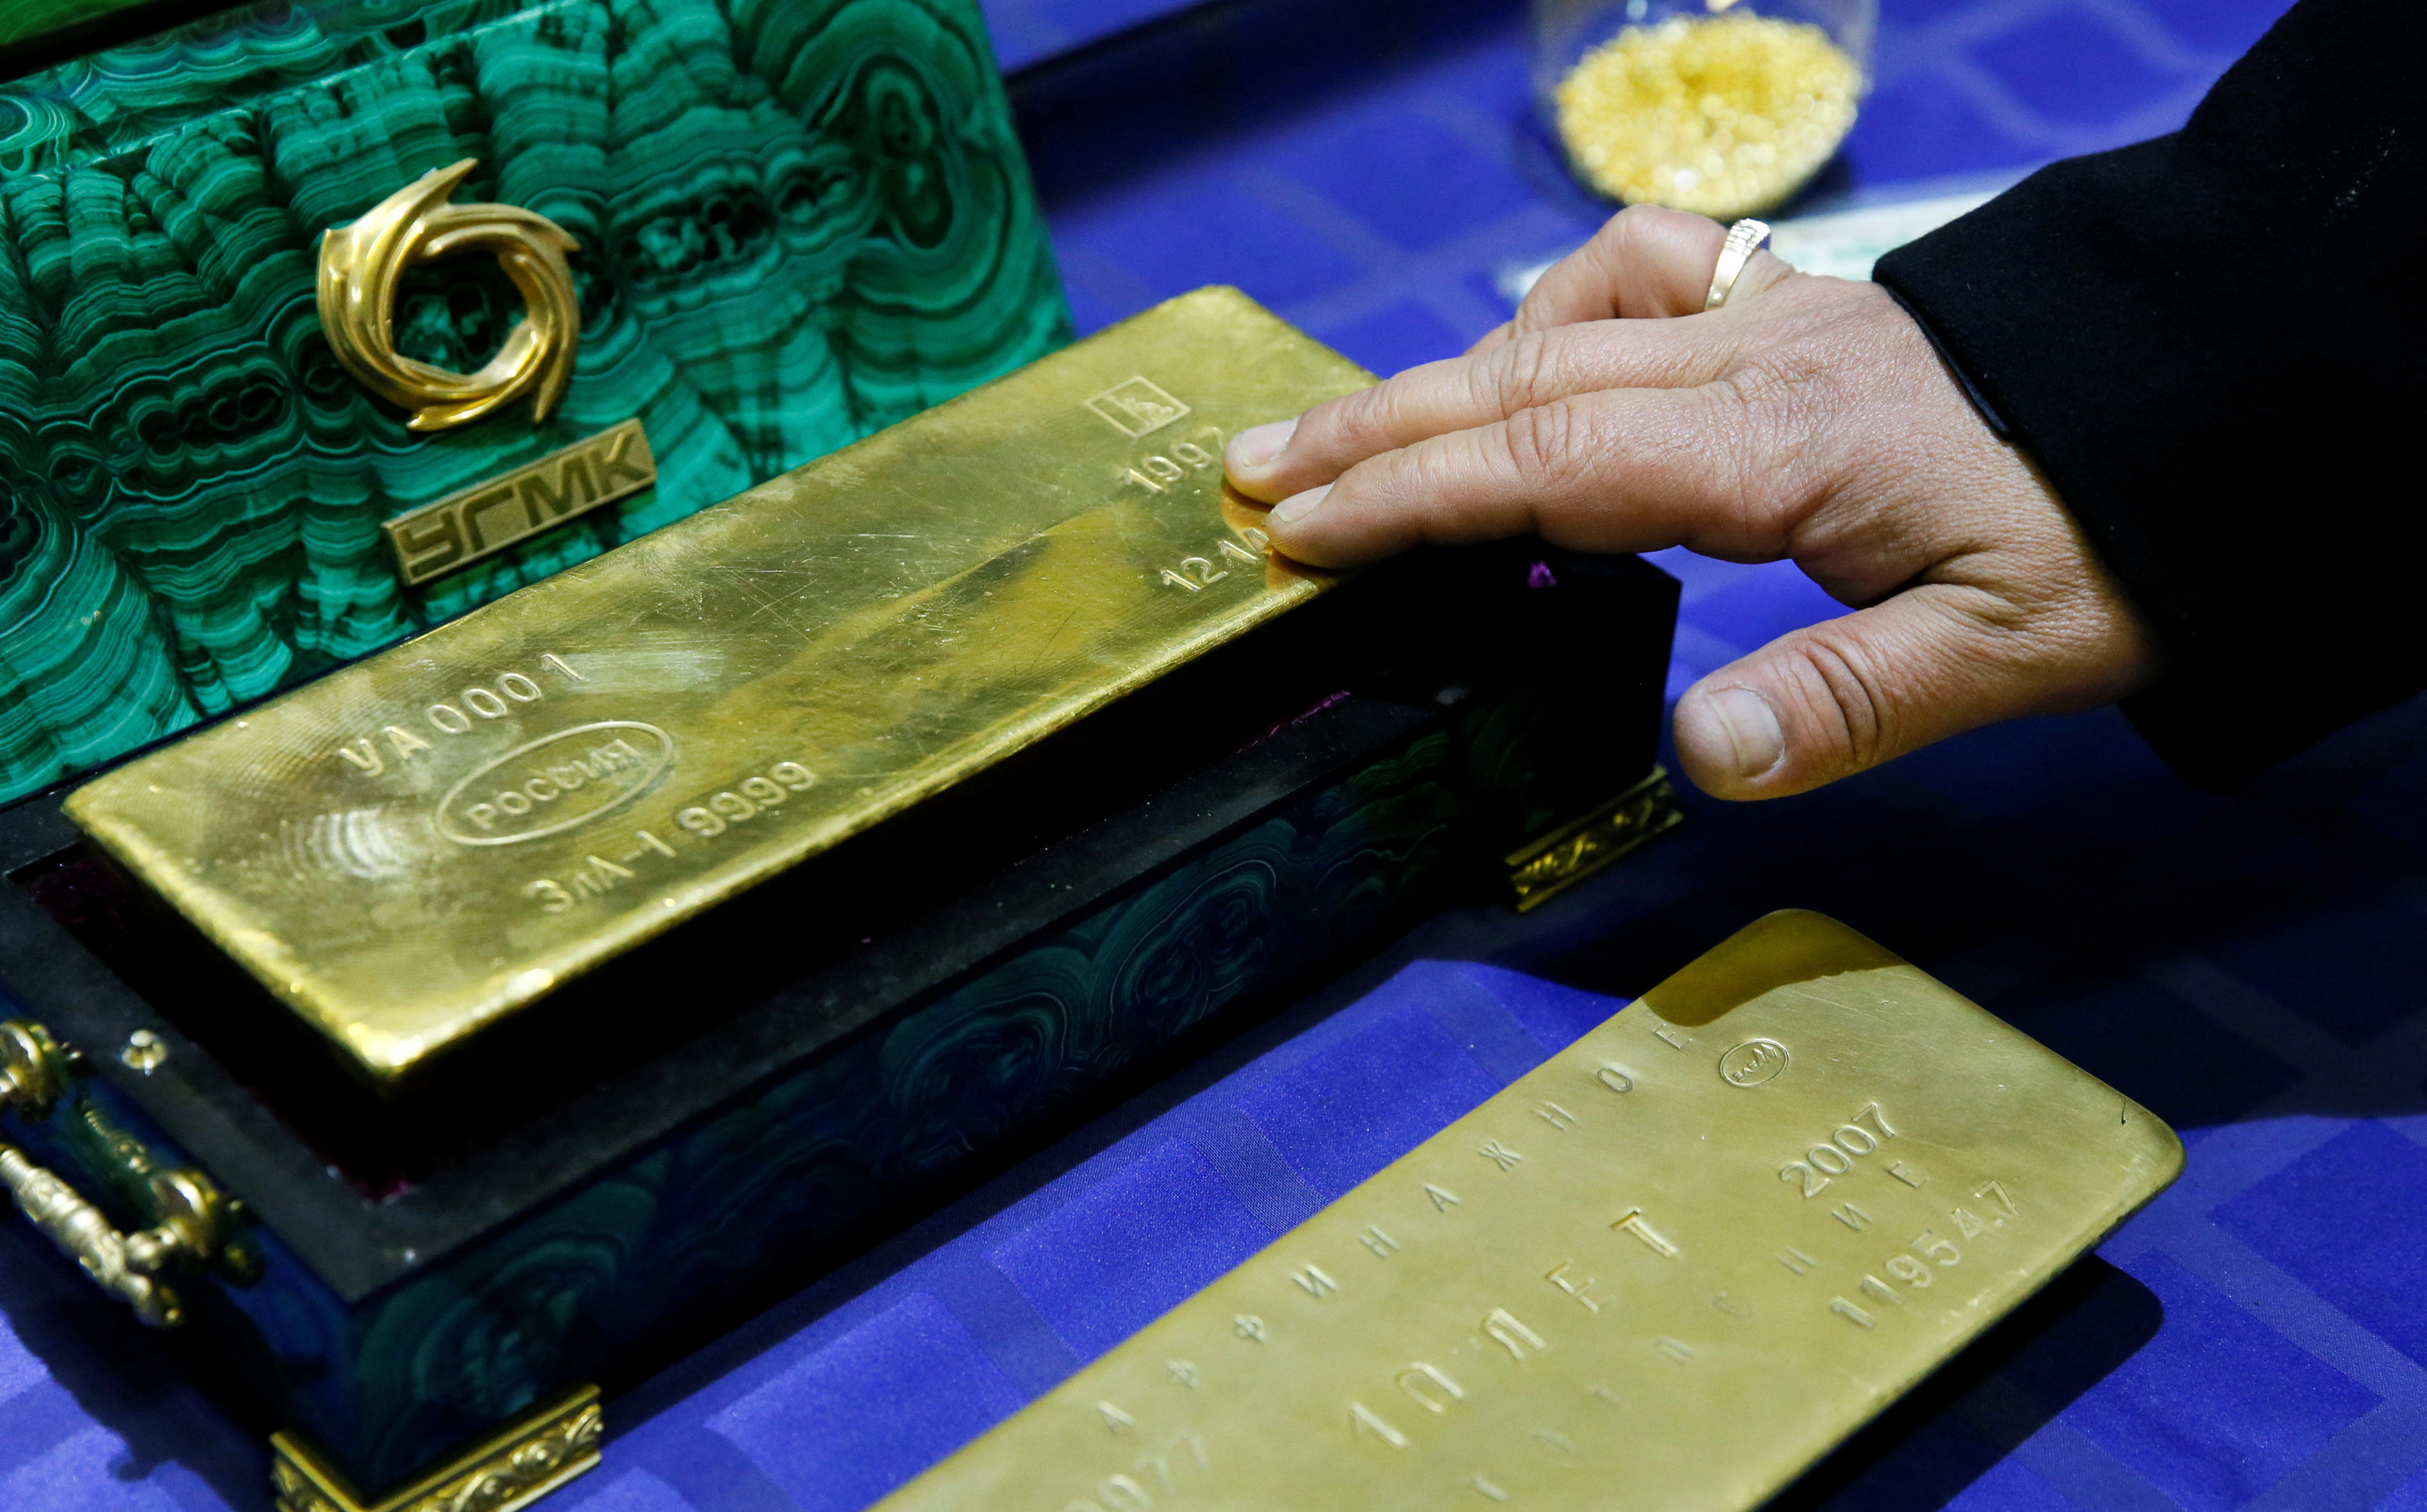 Employee displays a gold bar at a gold refining workshop of the plant of Uralelektromed Joint Stock Company, the enterprise of Ural Mining and Metallurgical company in the town of Verkhnyaya Pyshma